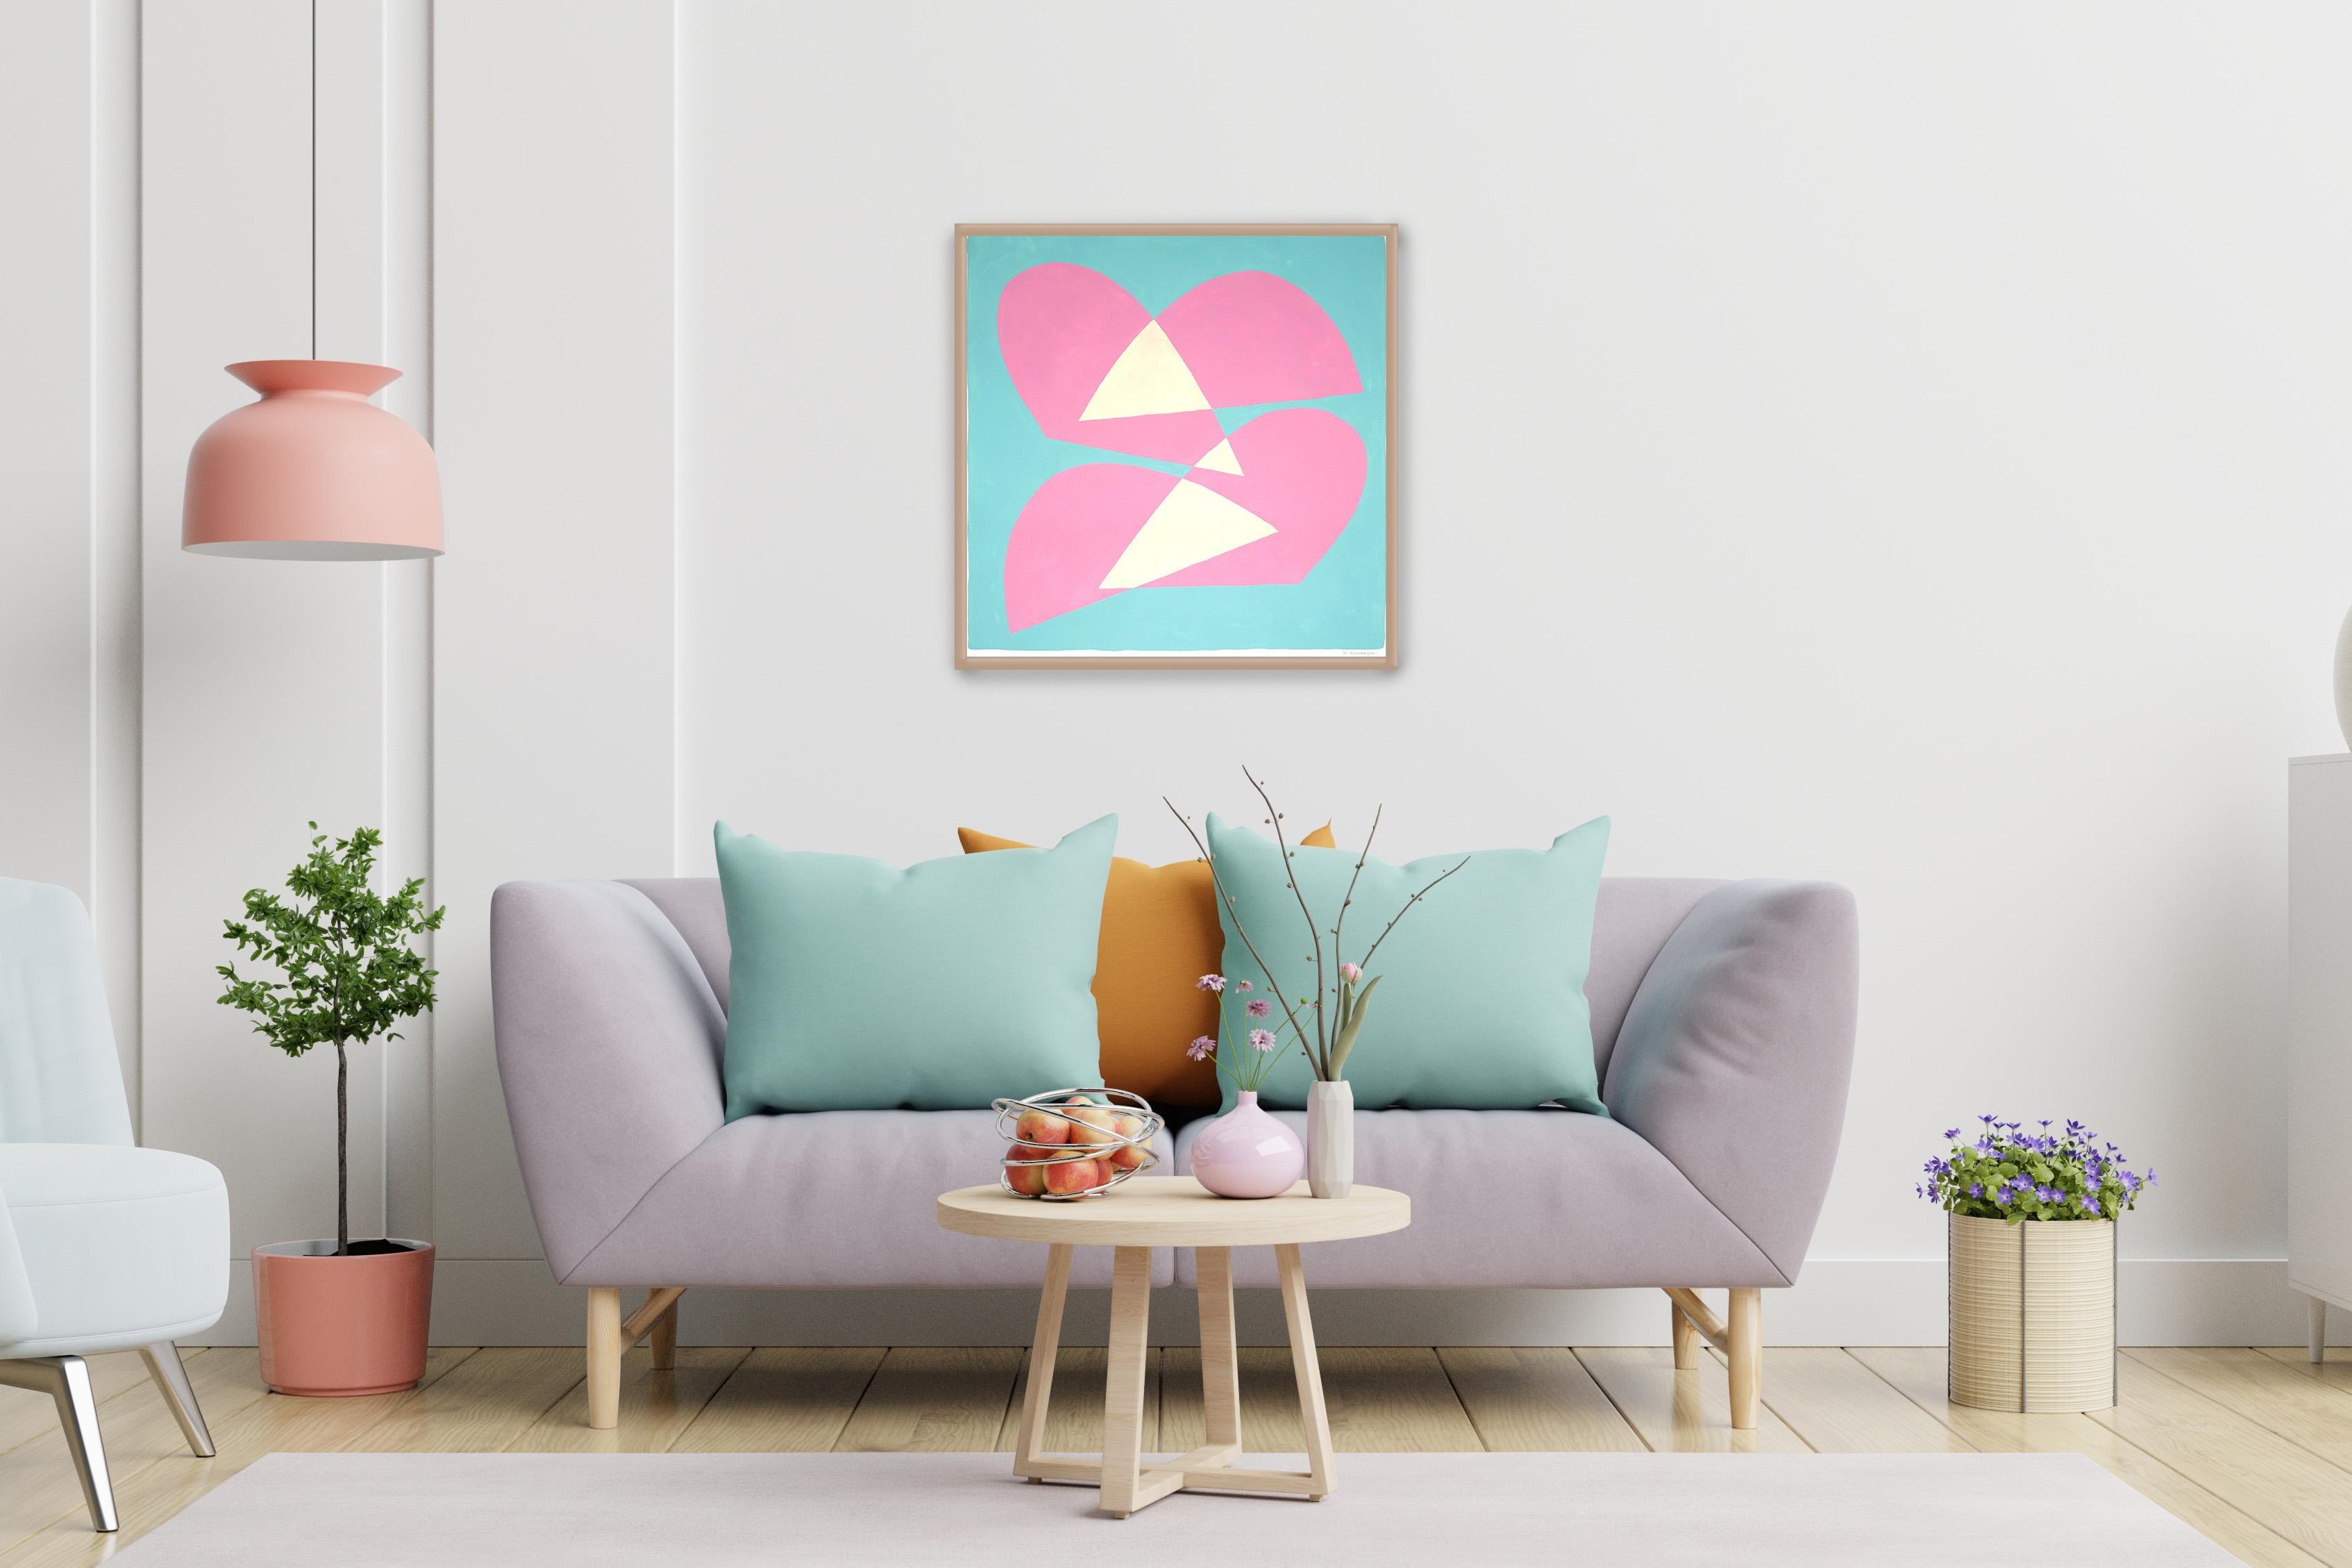 Crossing Arcs, Cutout Pastel Tones Shapes, Pale Pink, Turquoise, Modern, Neutral - Painting by Ryan Rivadeneyra